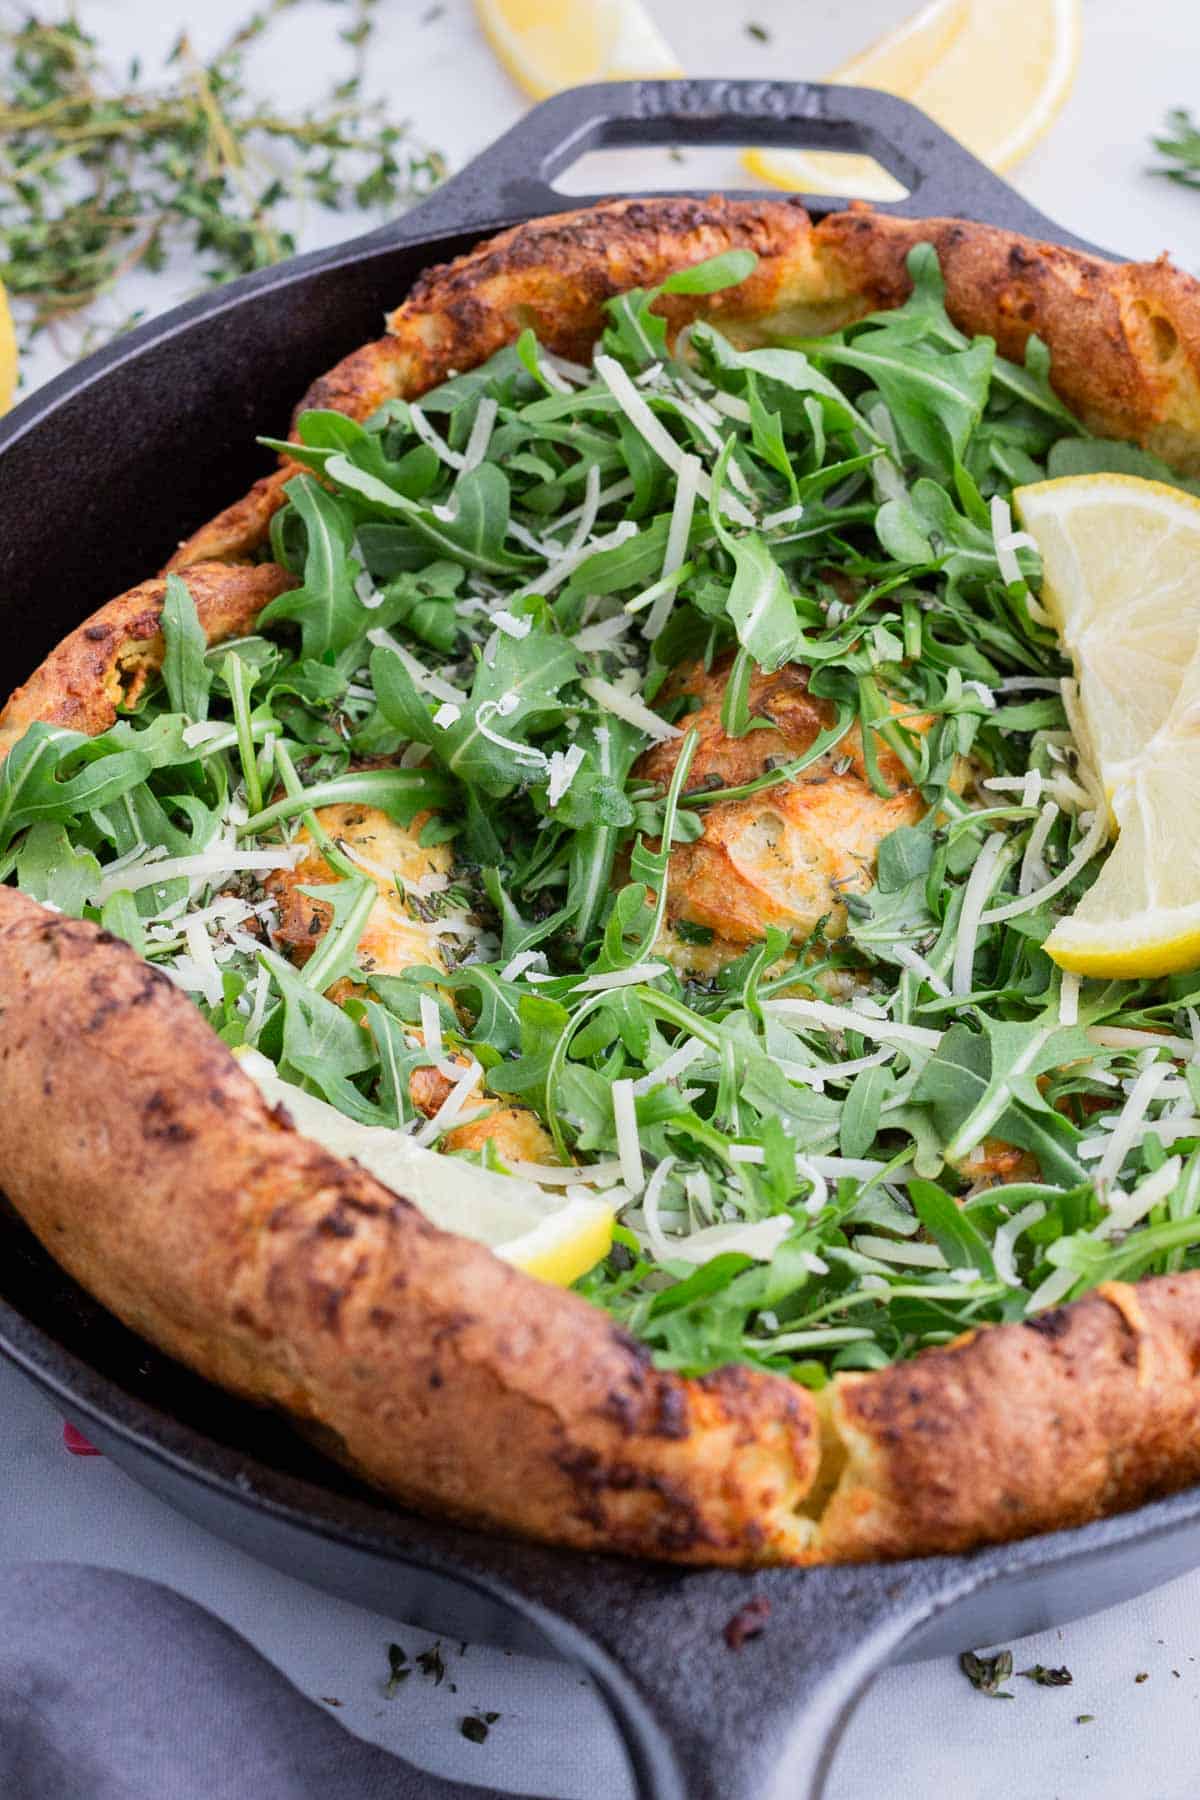 The toppings of arugula and parmesan cheese are added to the cooked Dutch baby.